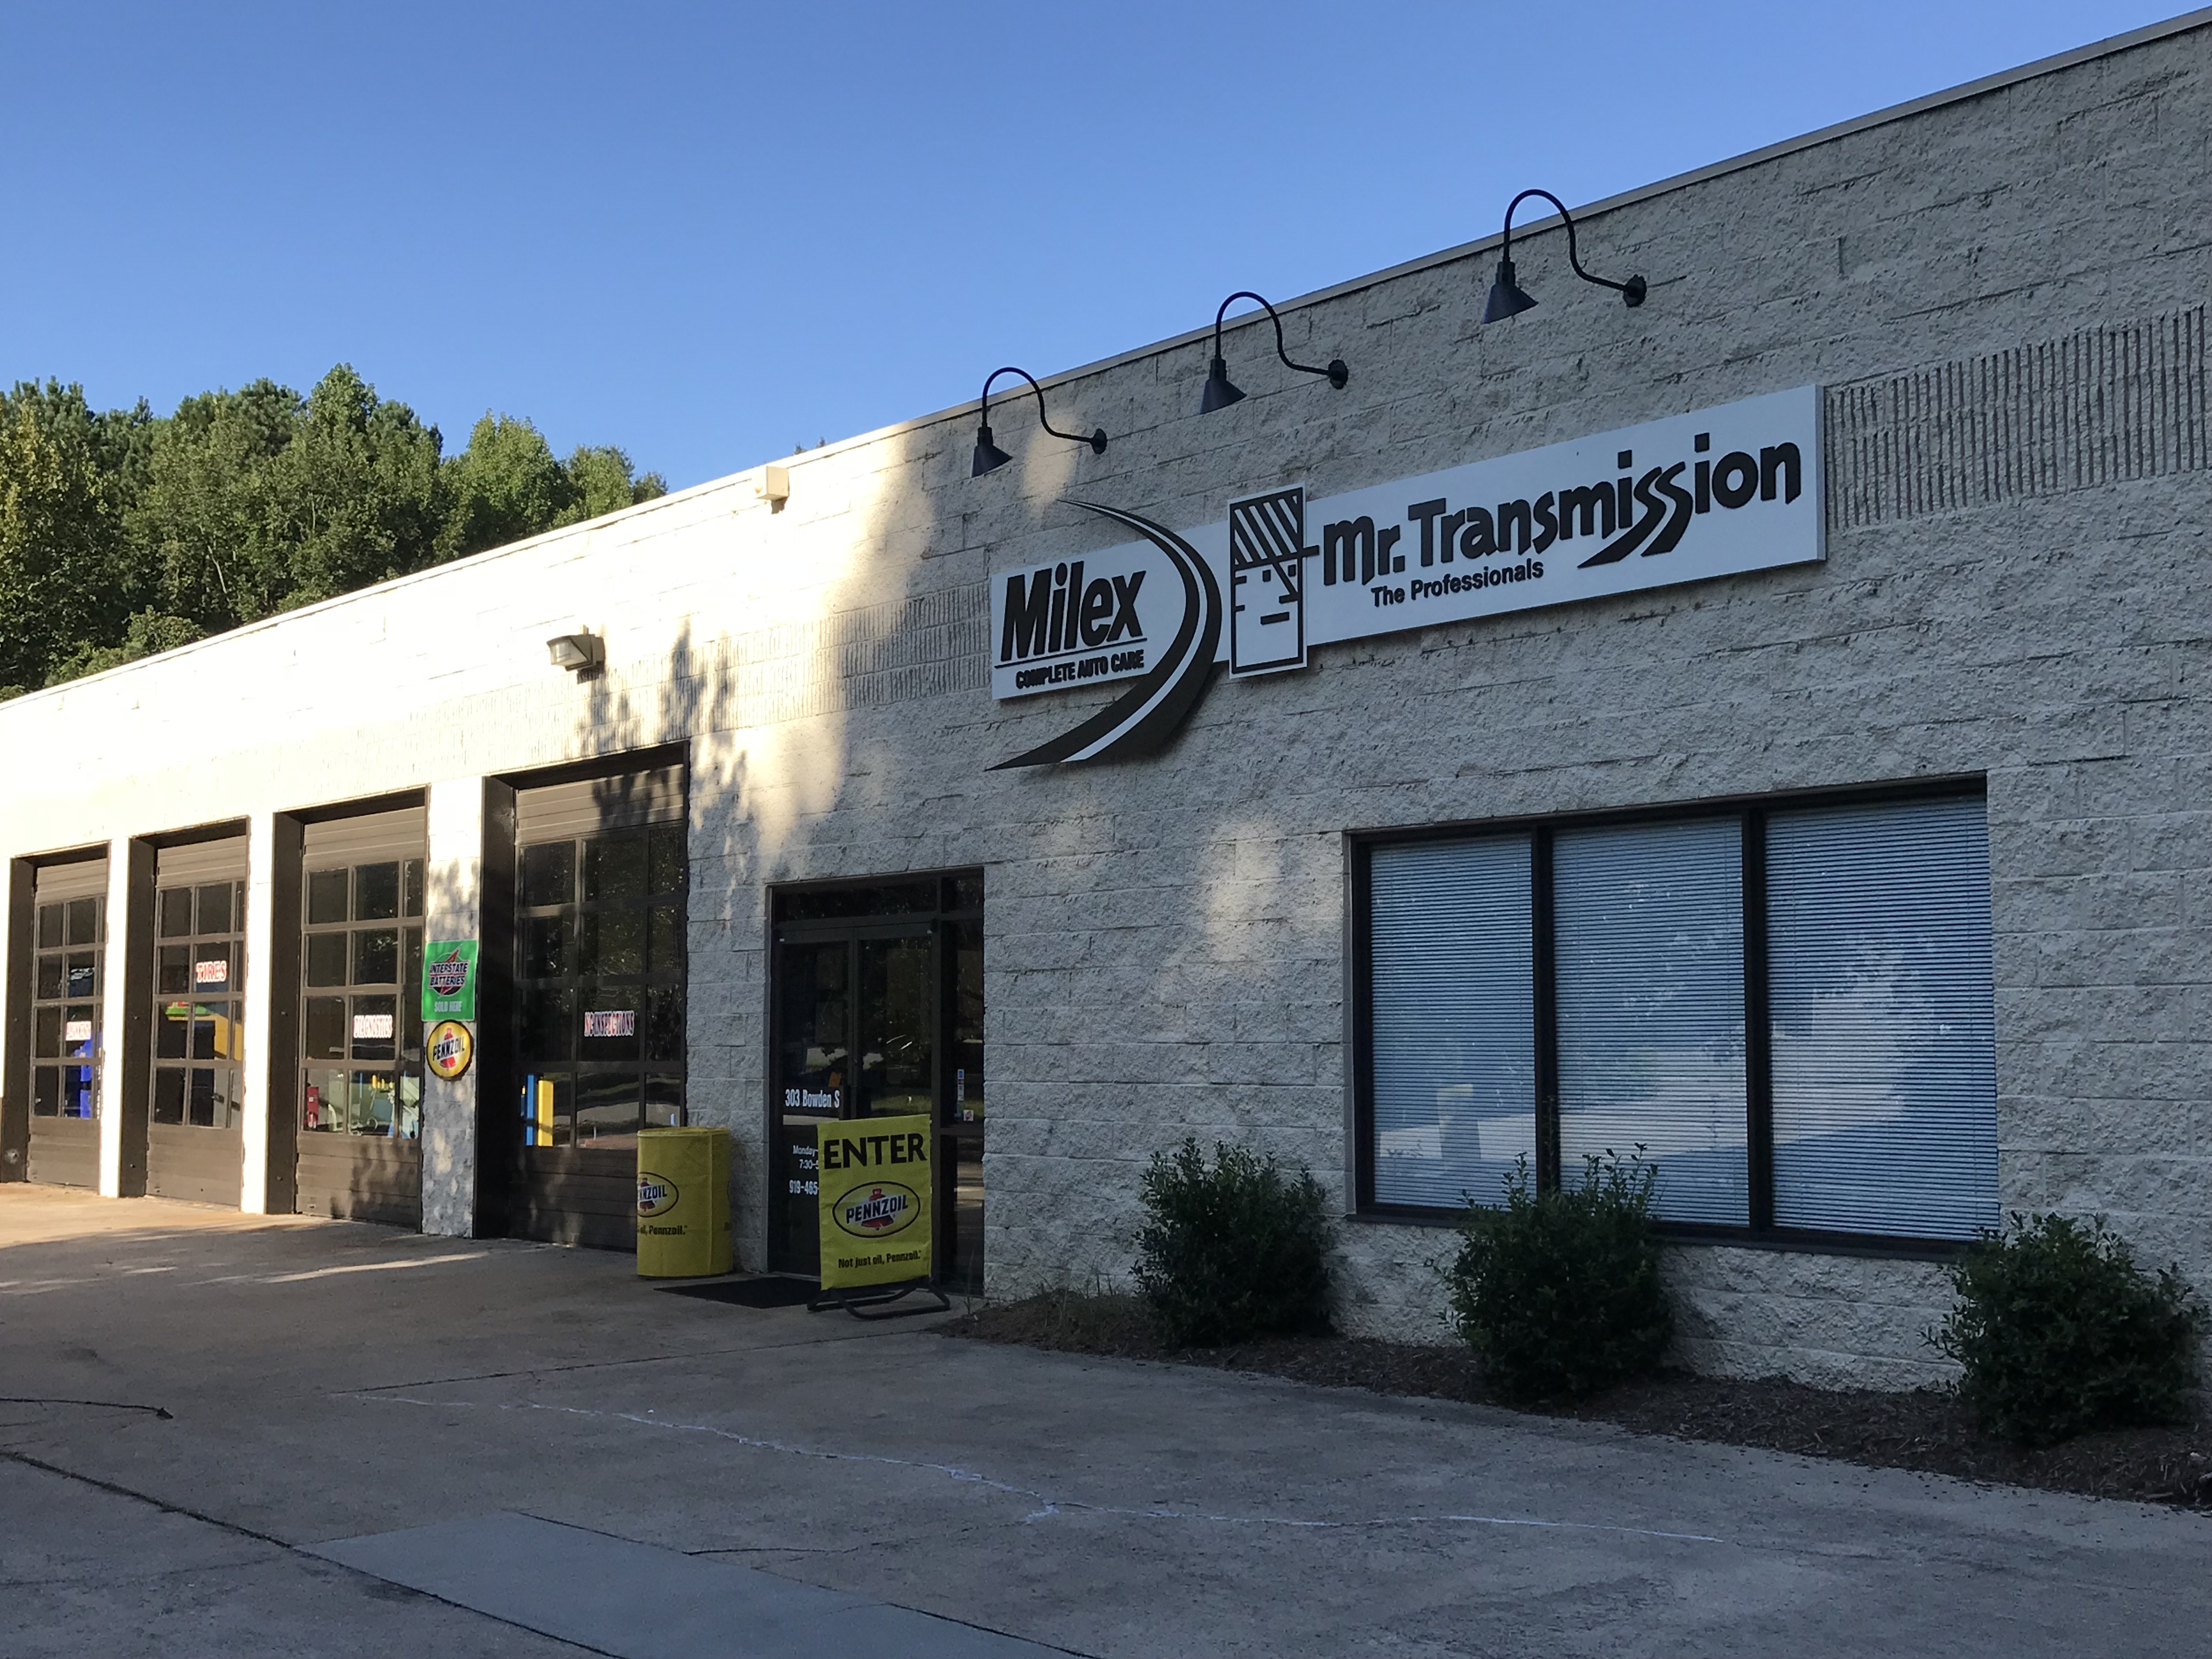 Mr. Transmission/Milex: A Day in the Life of a Franchisee